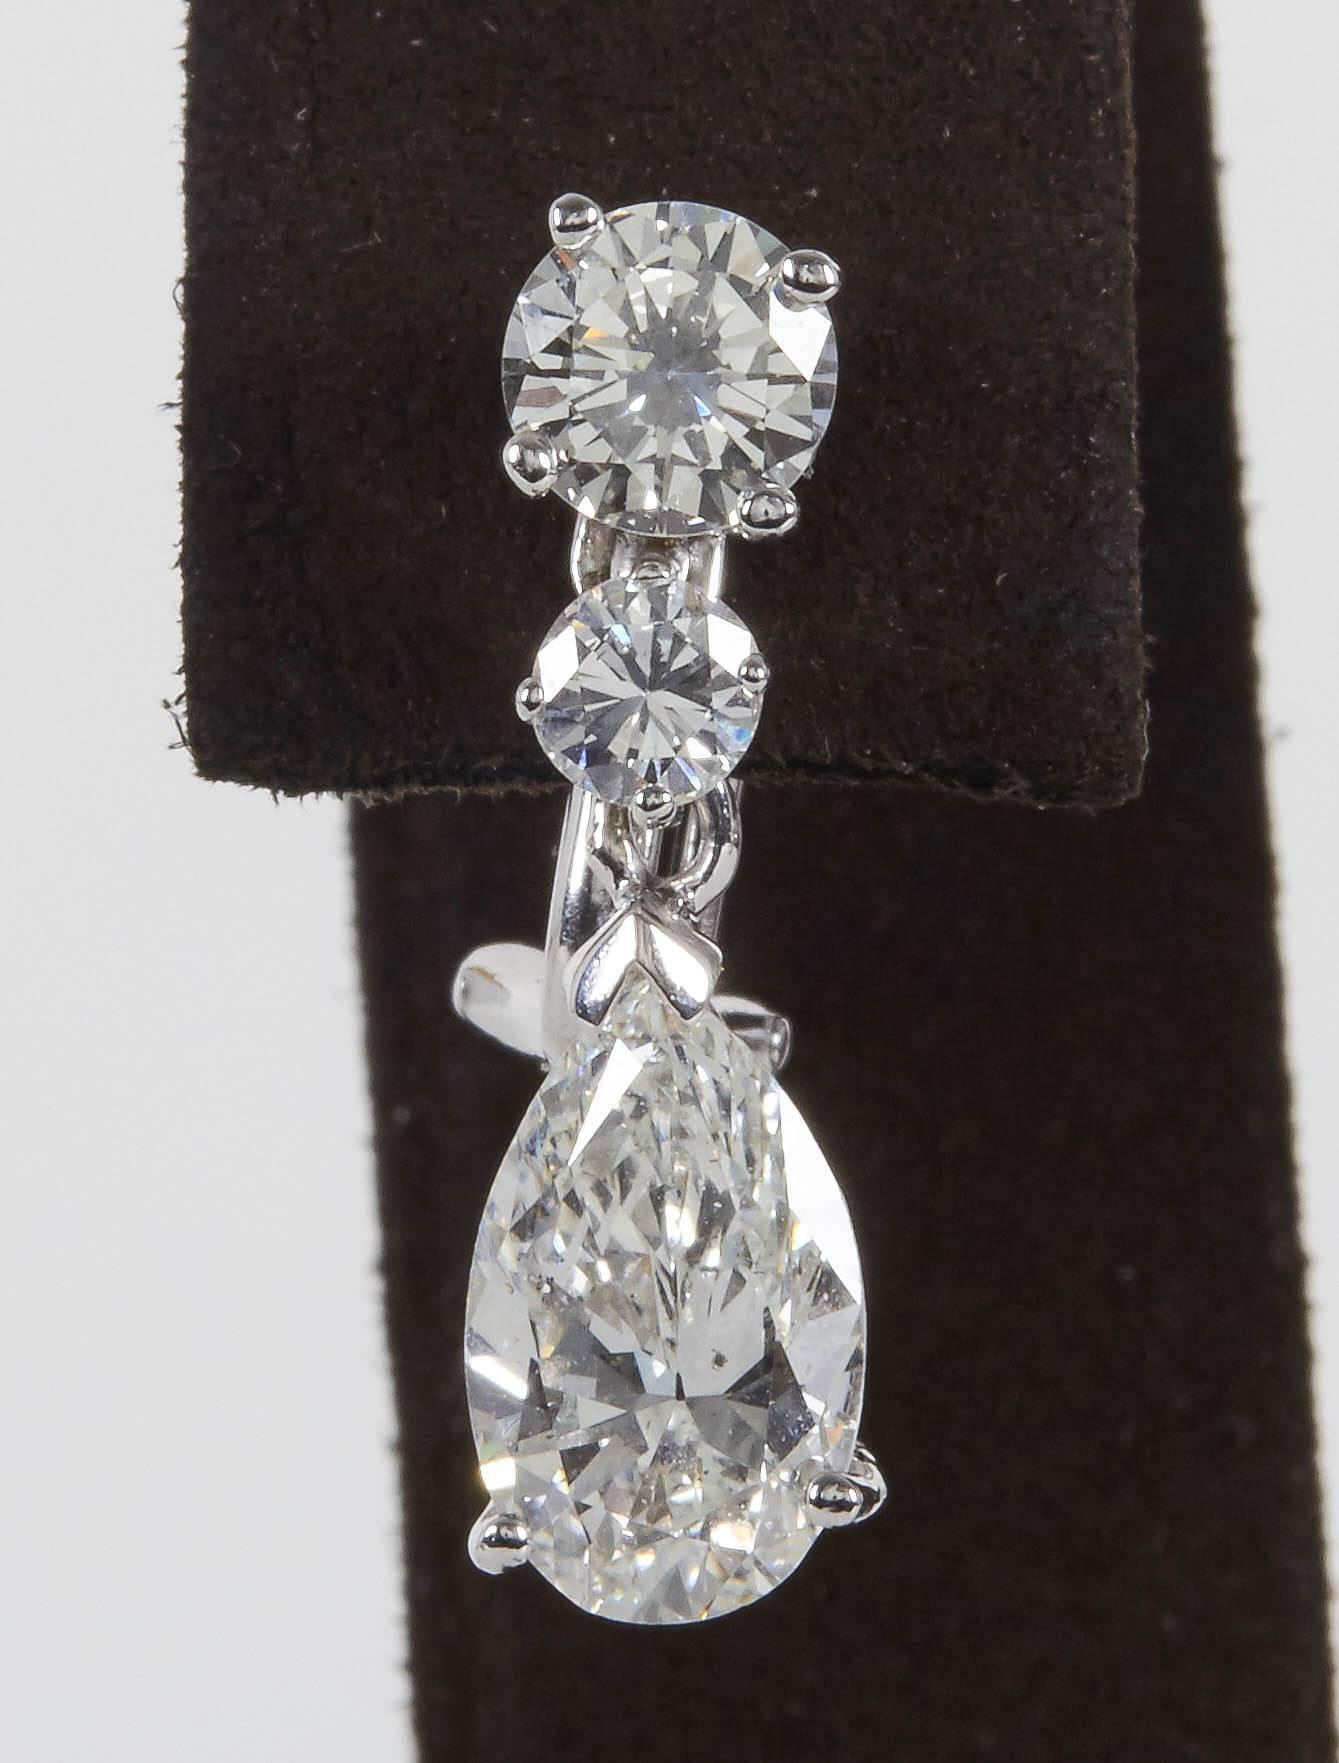 
A beautiful pair of classic diamond dangle drop earrings set in a timeless design. 

3.00 cts (total) of pear shapes suspended from 1.30 carats (total) of round brilliant cut diamonds. 

The diamonds are near colorless white, H/I VS1-SI1. 

The